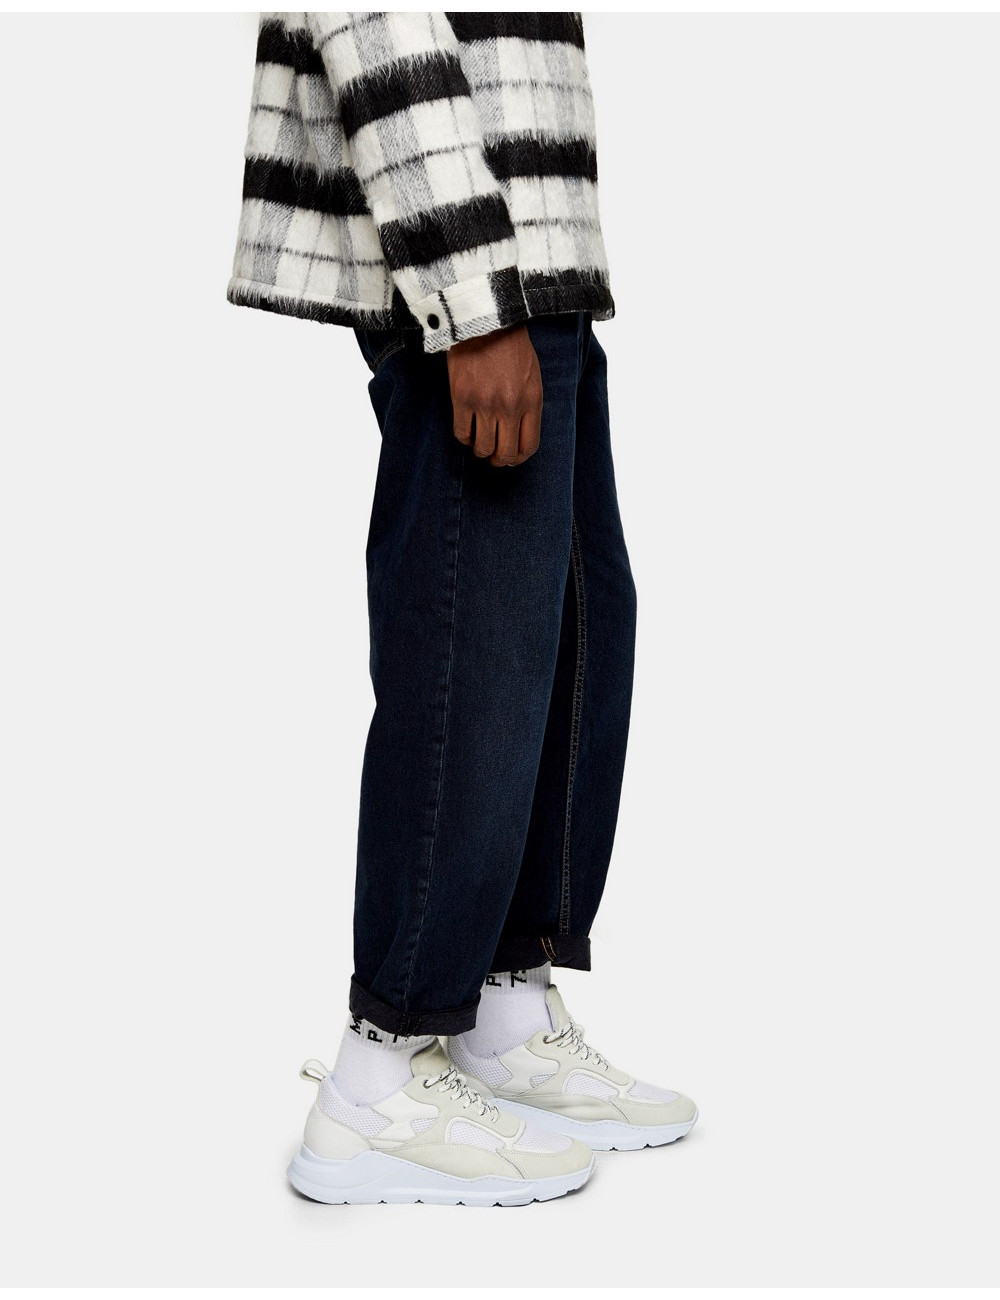 Topman relaxed jeans in indigo